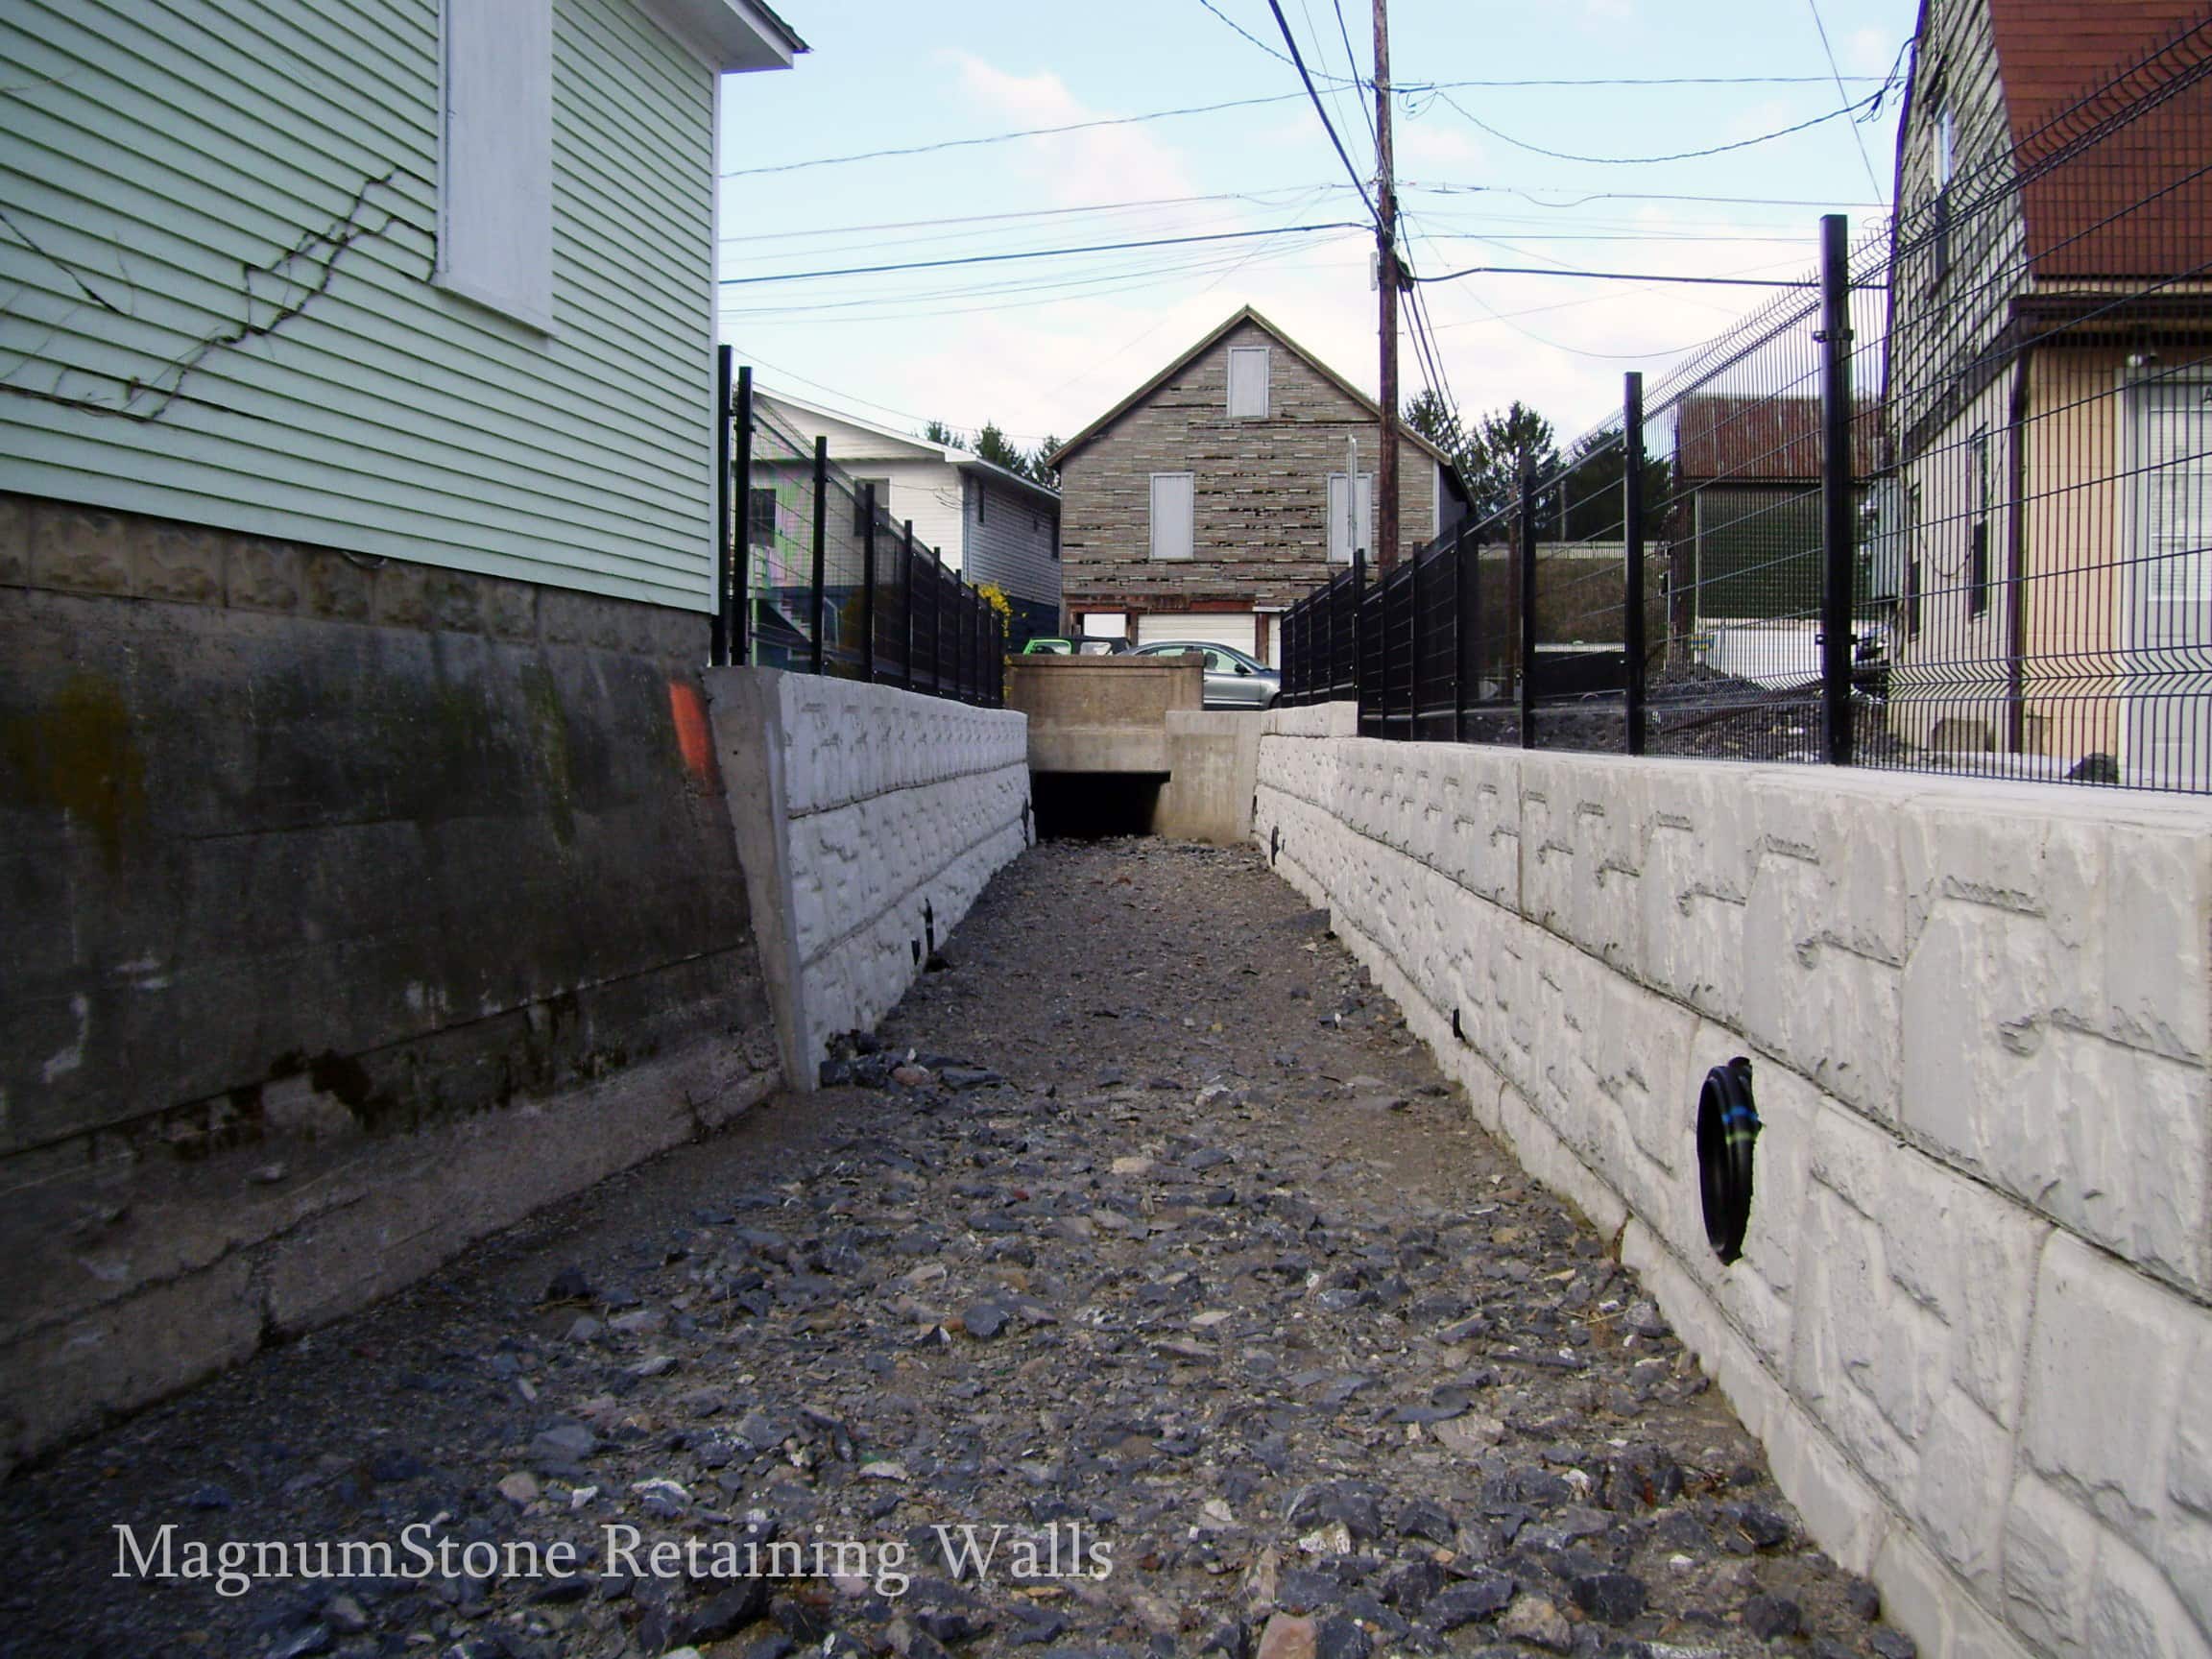 MagnumStone Retaining Wall Stormwater Management Application